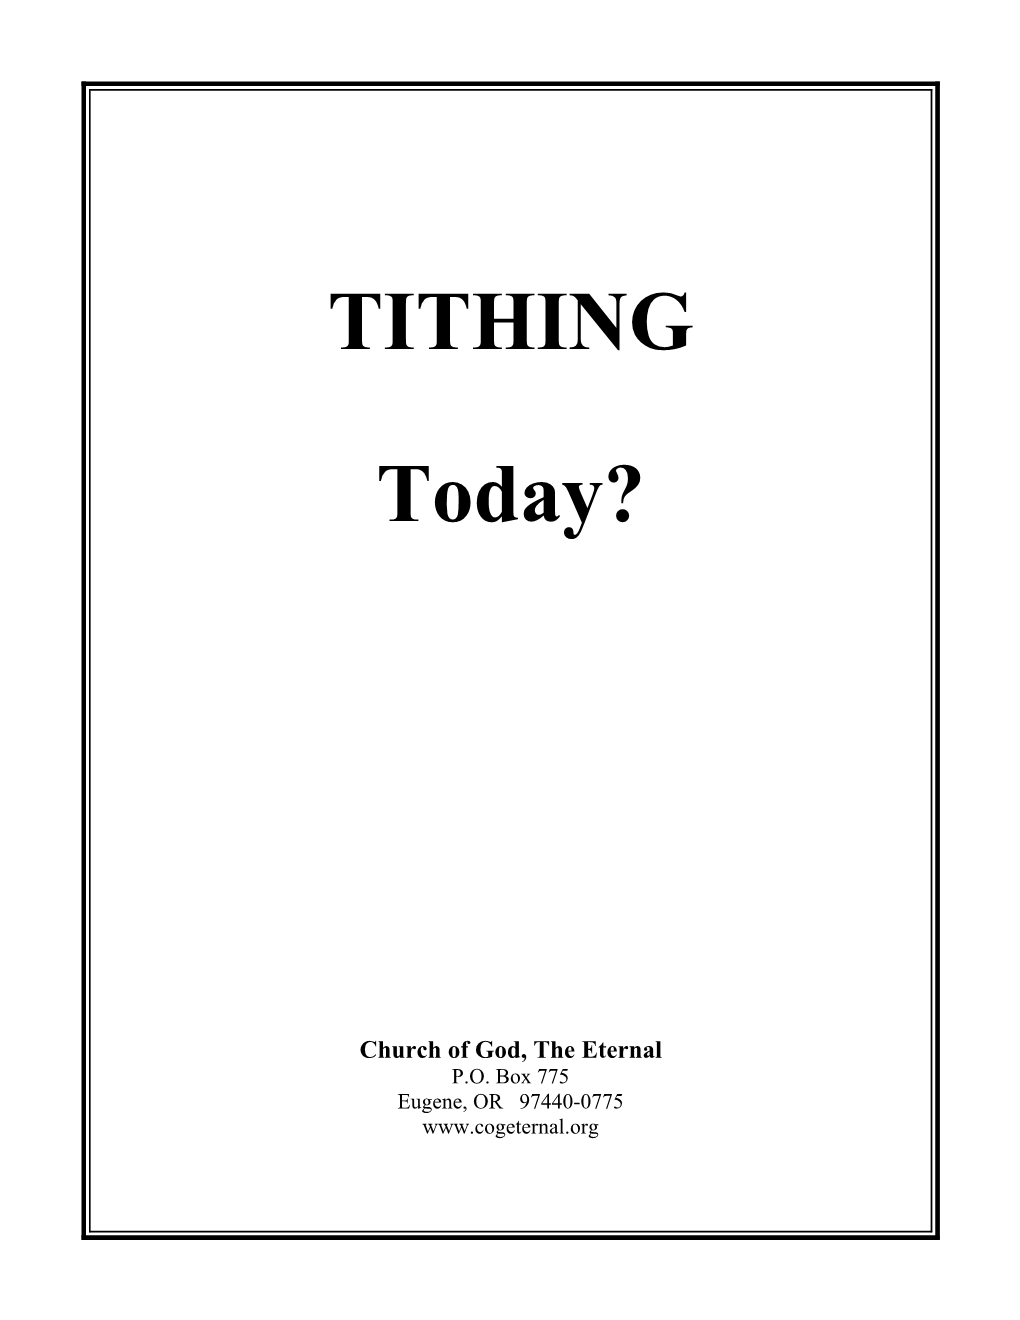 Tithing Today?